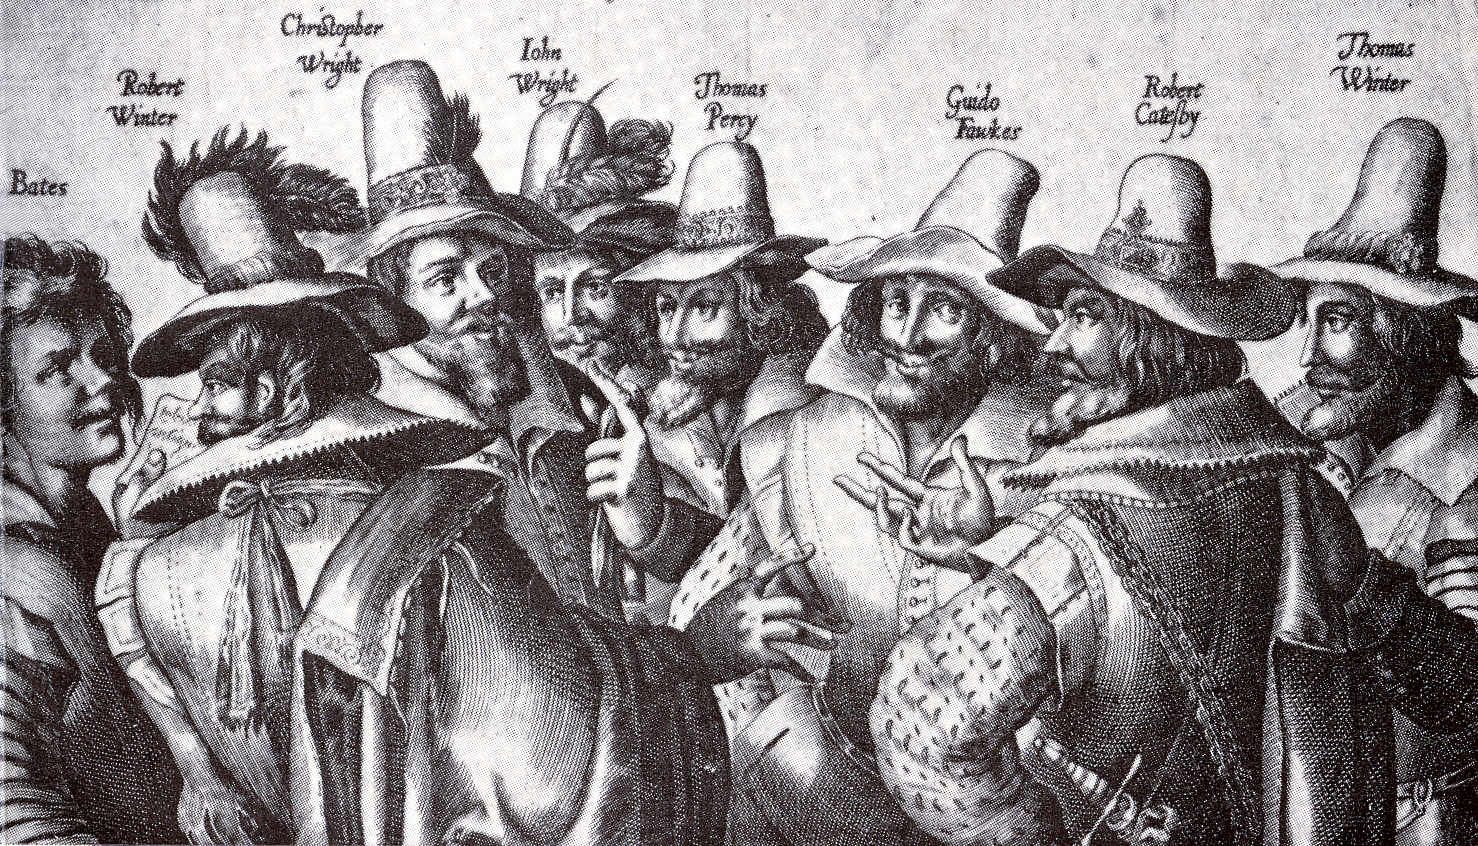 Who’s That Guy?  5 things you probably didn’t know about the man behind the Gunpowder Plot